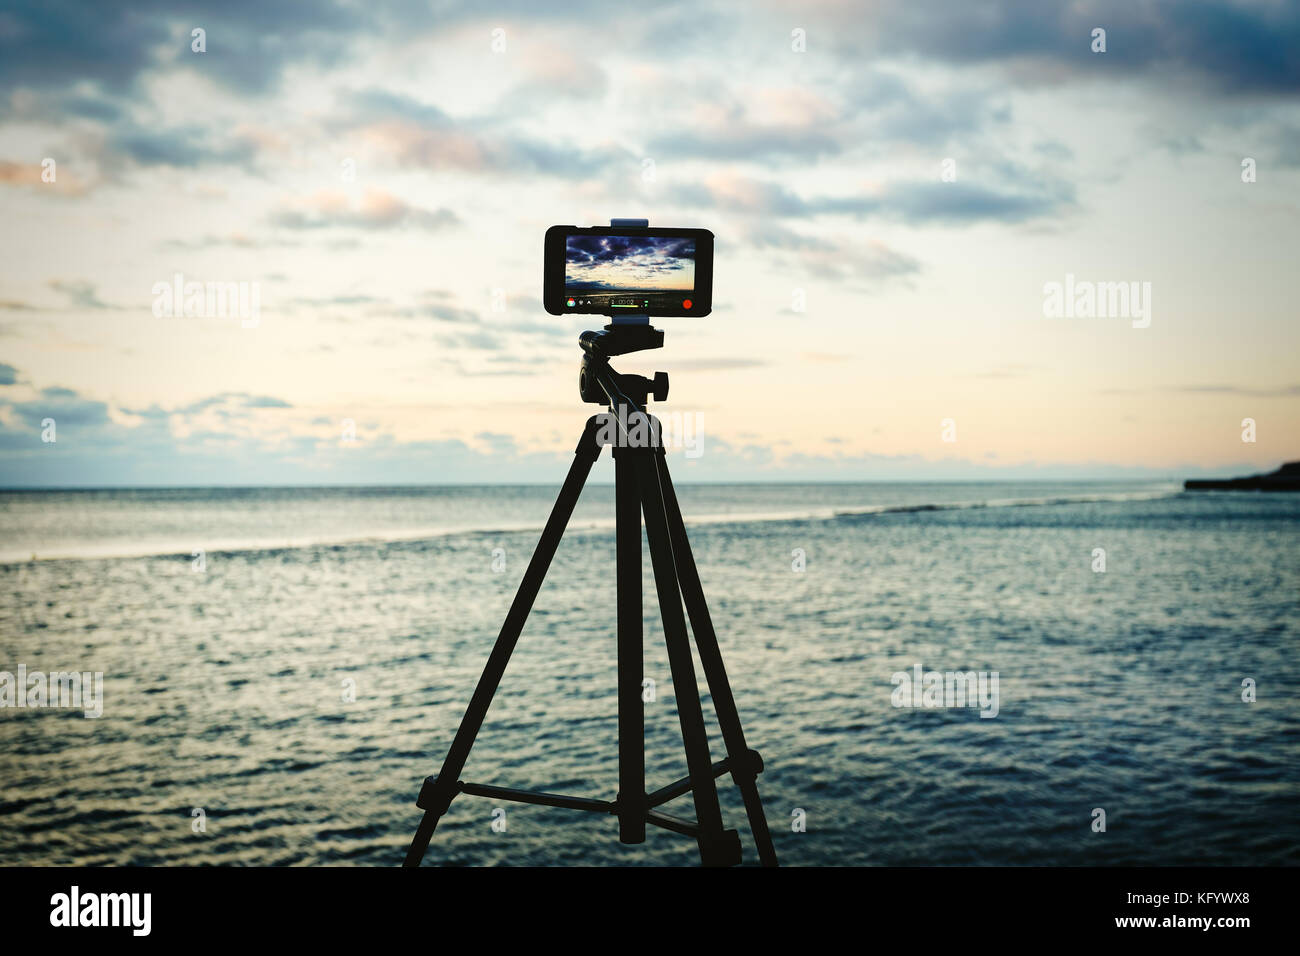 Smartphone on tripod capturing seascape sunrise. Mobile photography or videography concept. Stock Photo